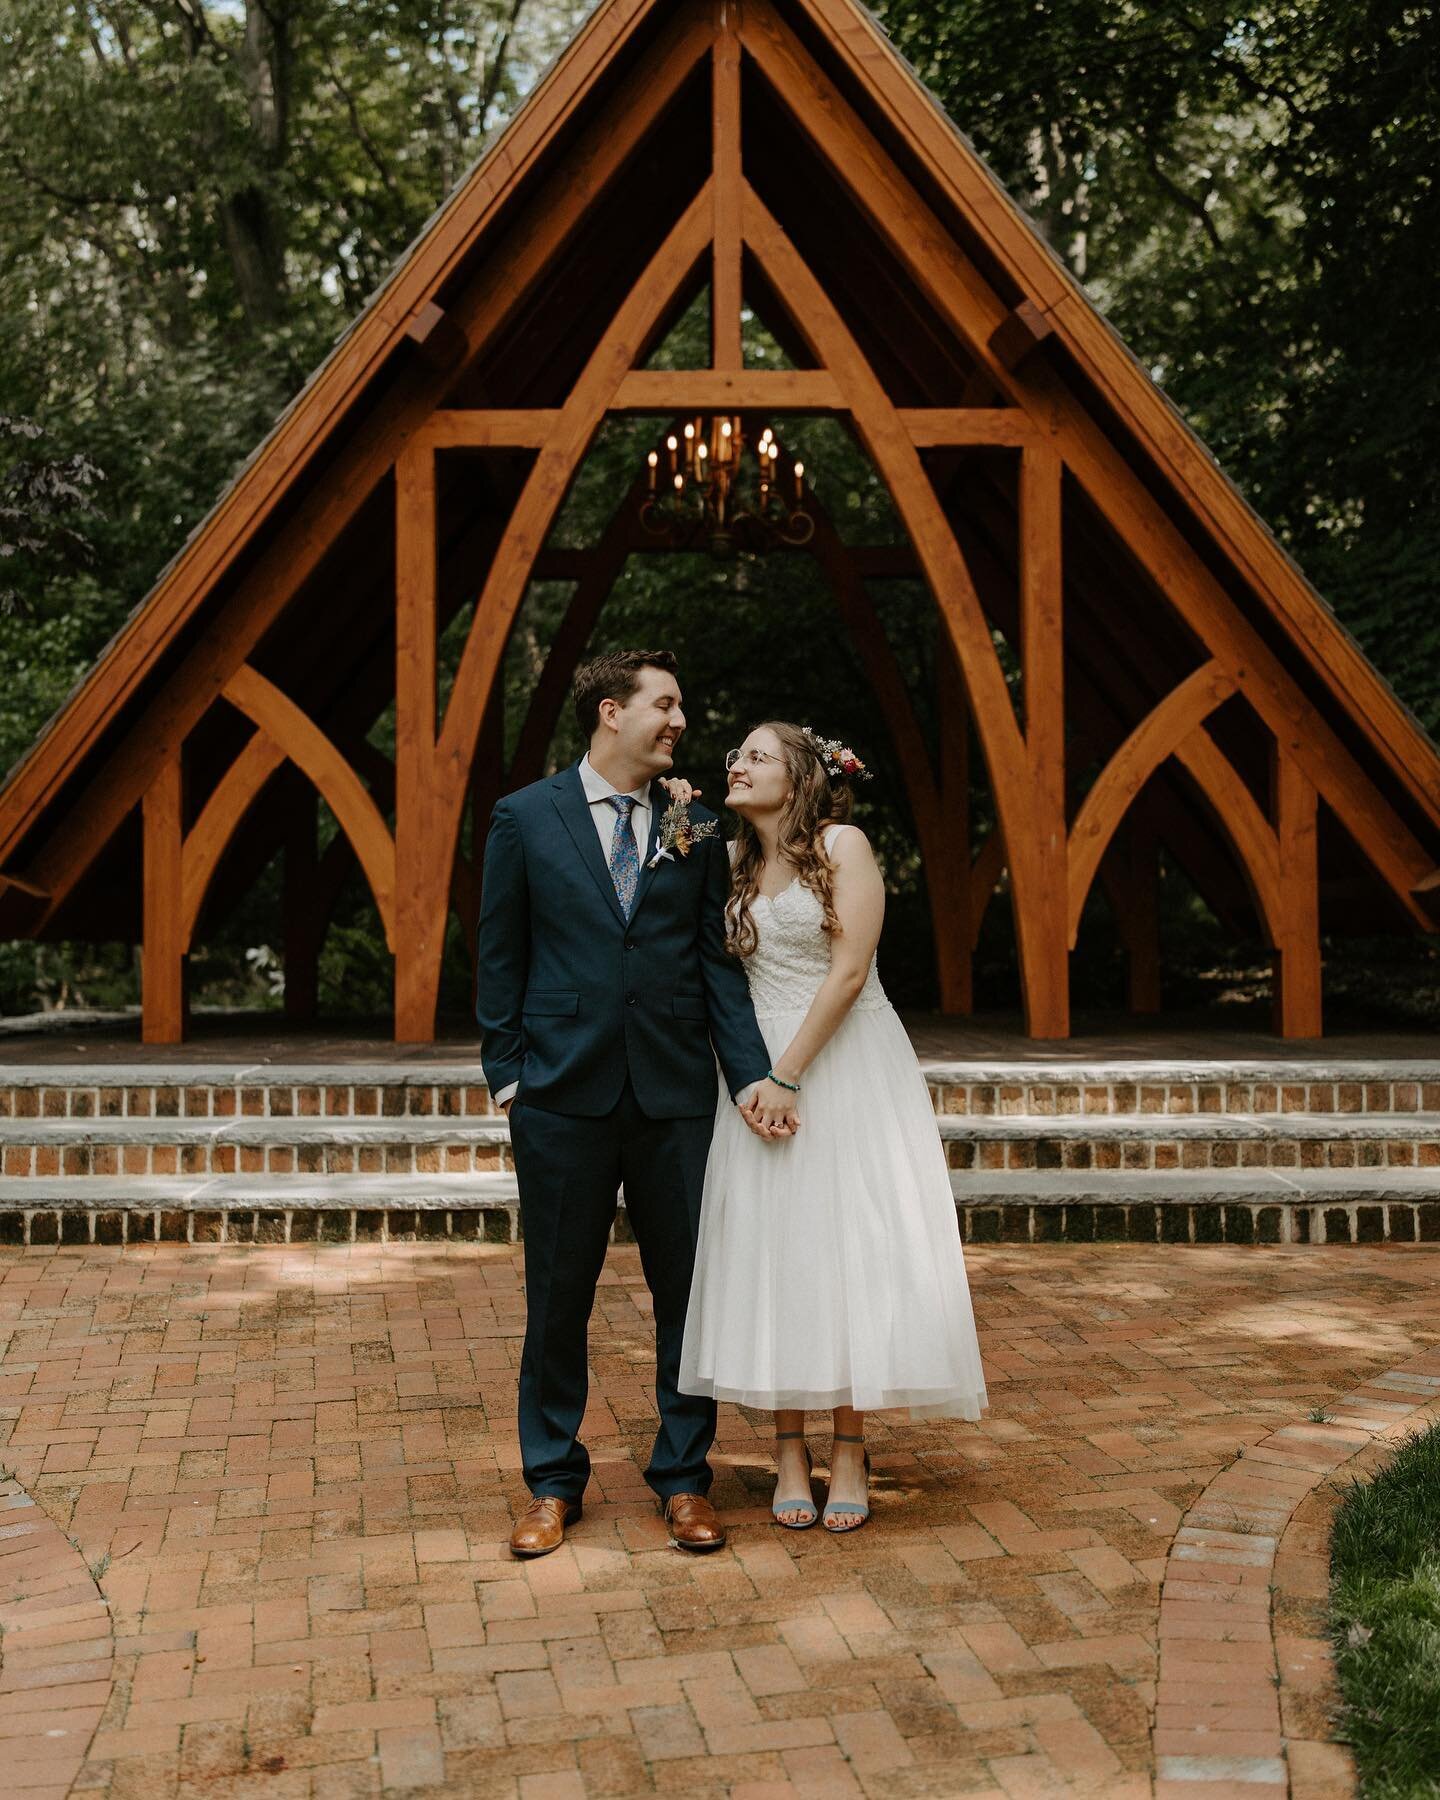 maddie and jeremy&rsquo;s woodland ceremony was straight out of a fairytale✨

my first quaker wedding is in the books - and such a beautiful wedding it was! congratulations mr. and mrs. rose!🍕🤍

venue | @stonemillinn
officiant | @delontegholston 
v